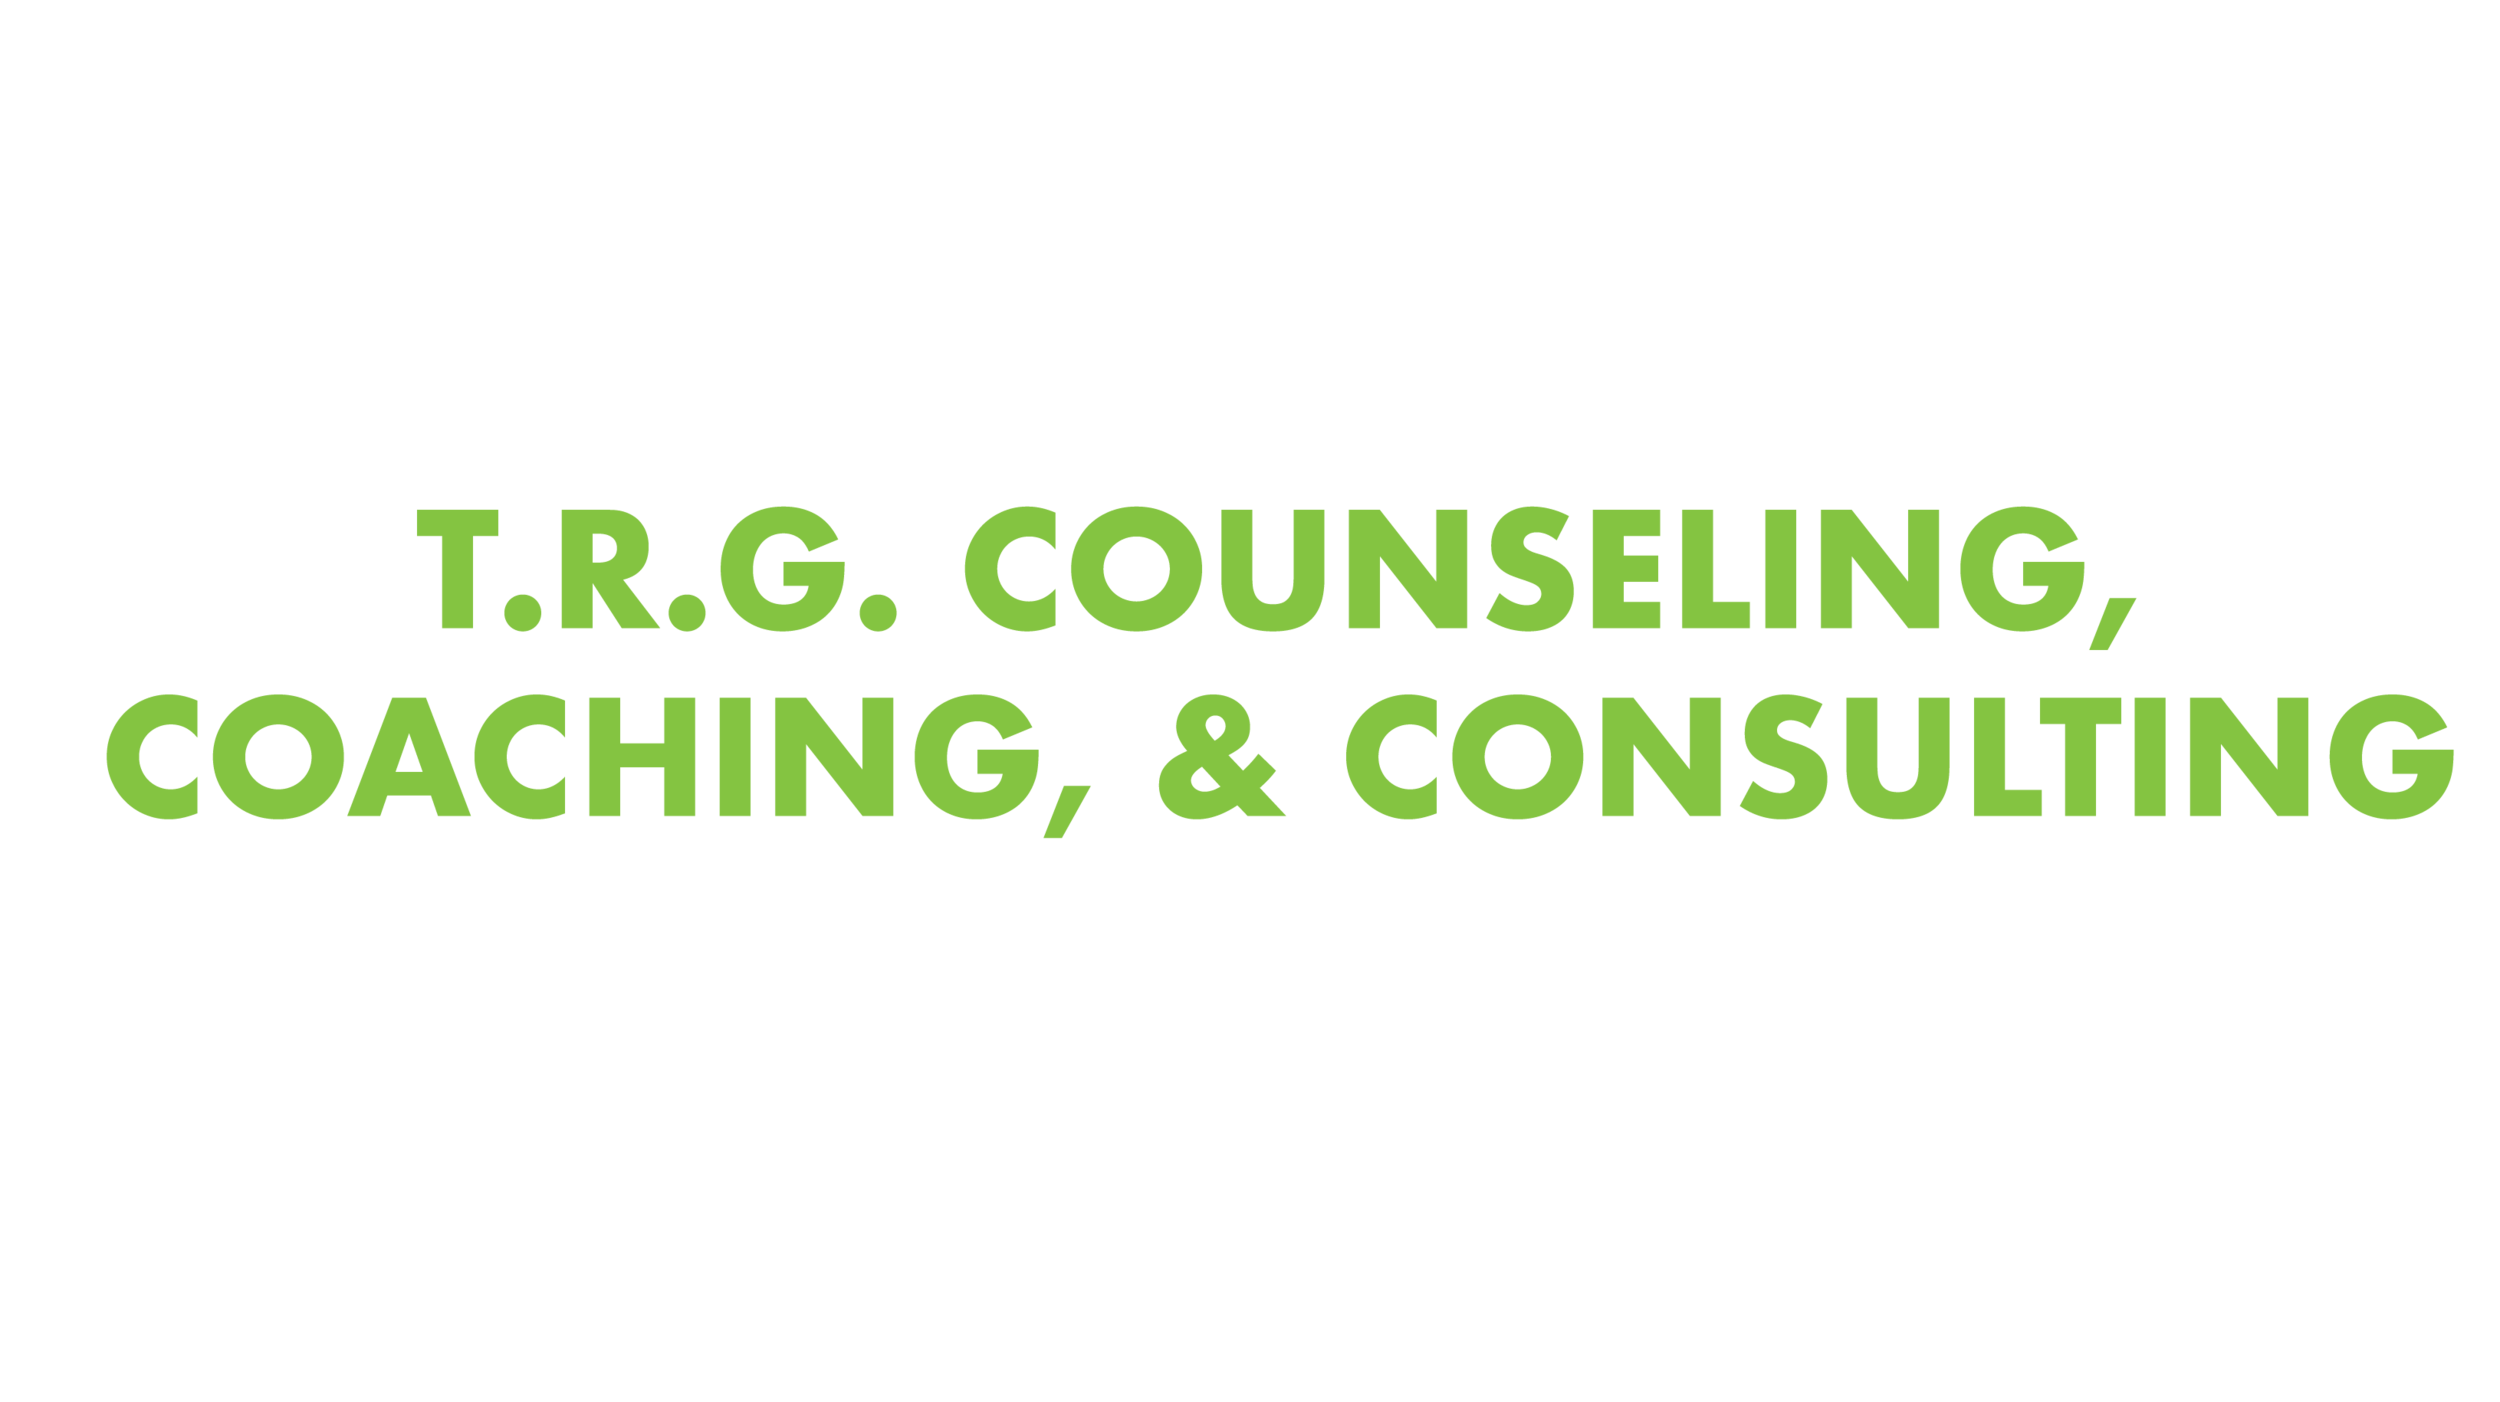 TRG COUNSELING, COACHING &amp; CONSULTING